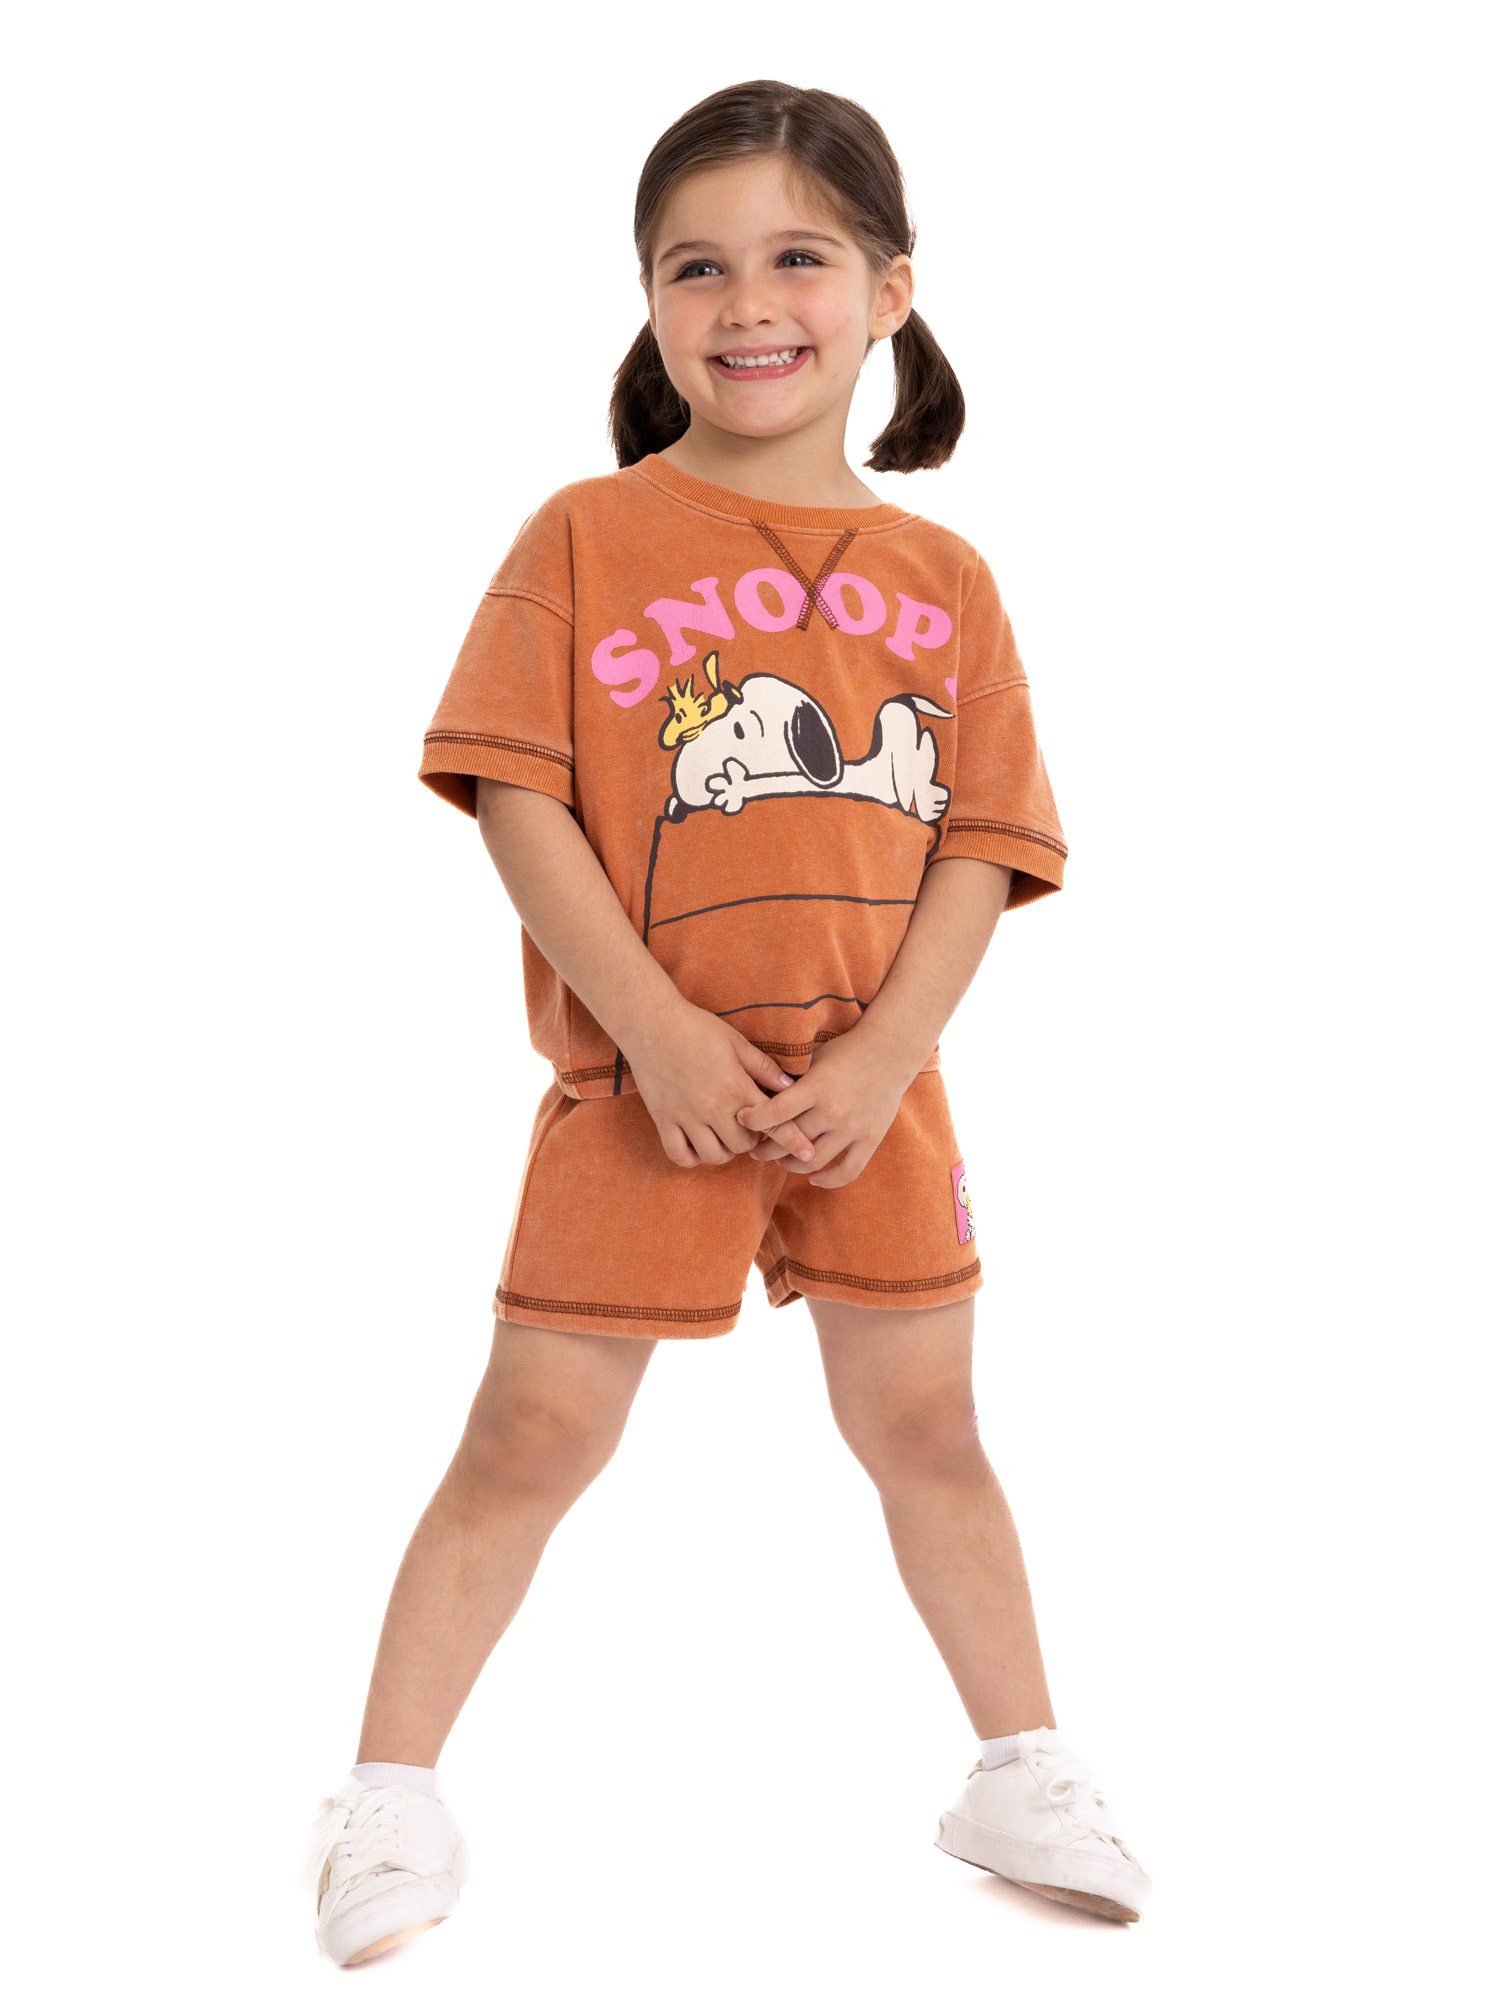 Snoopy Toddler Girls Tee and Shorts Set, 2-Piece, Sizes 12M-5T - image 1 of 12